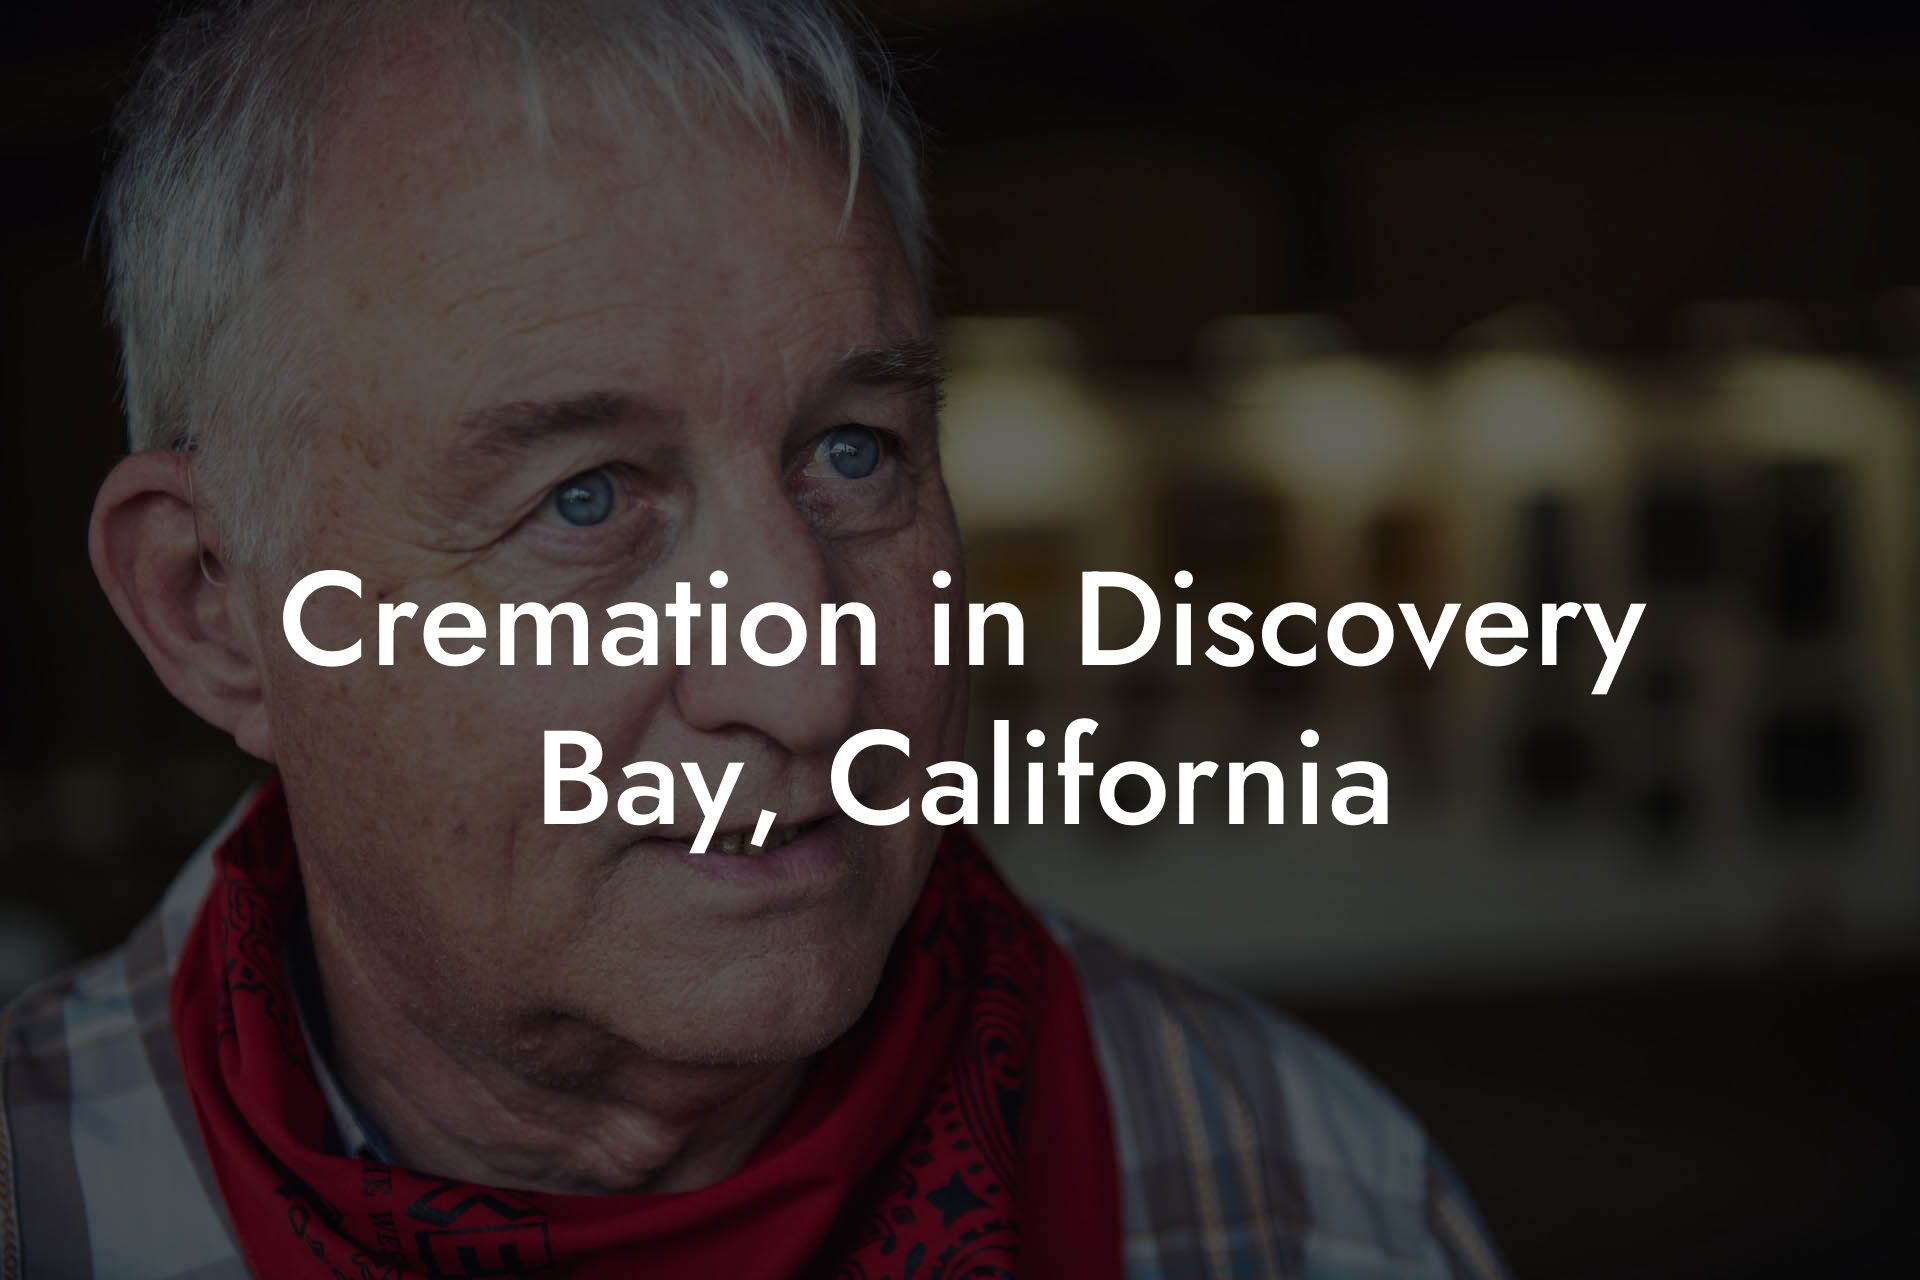 Cremation in Discovery Bay, California